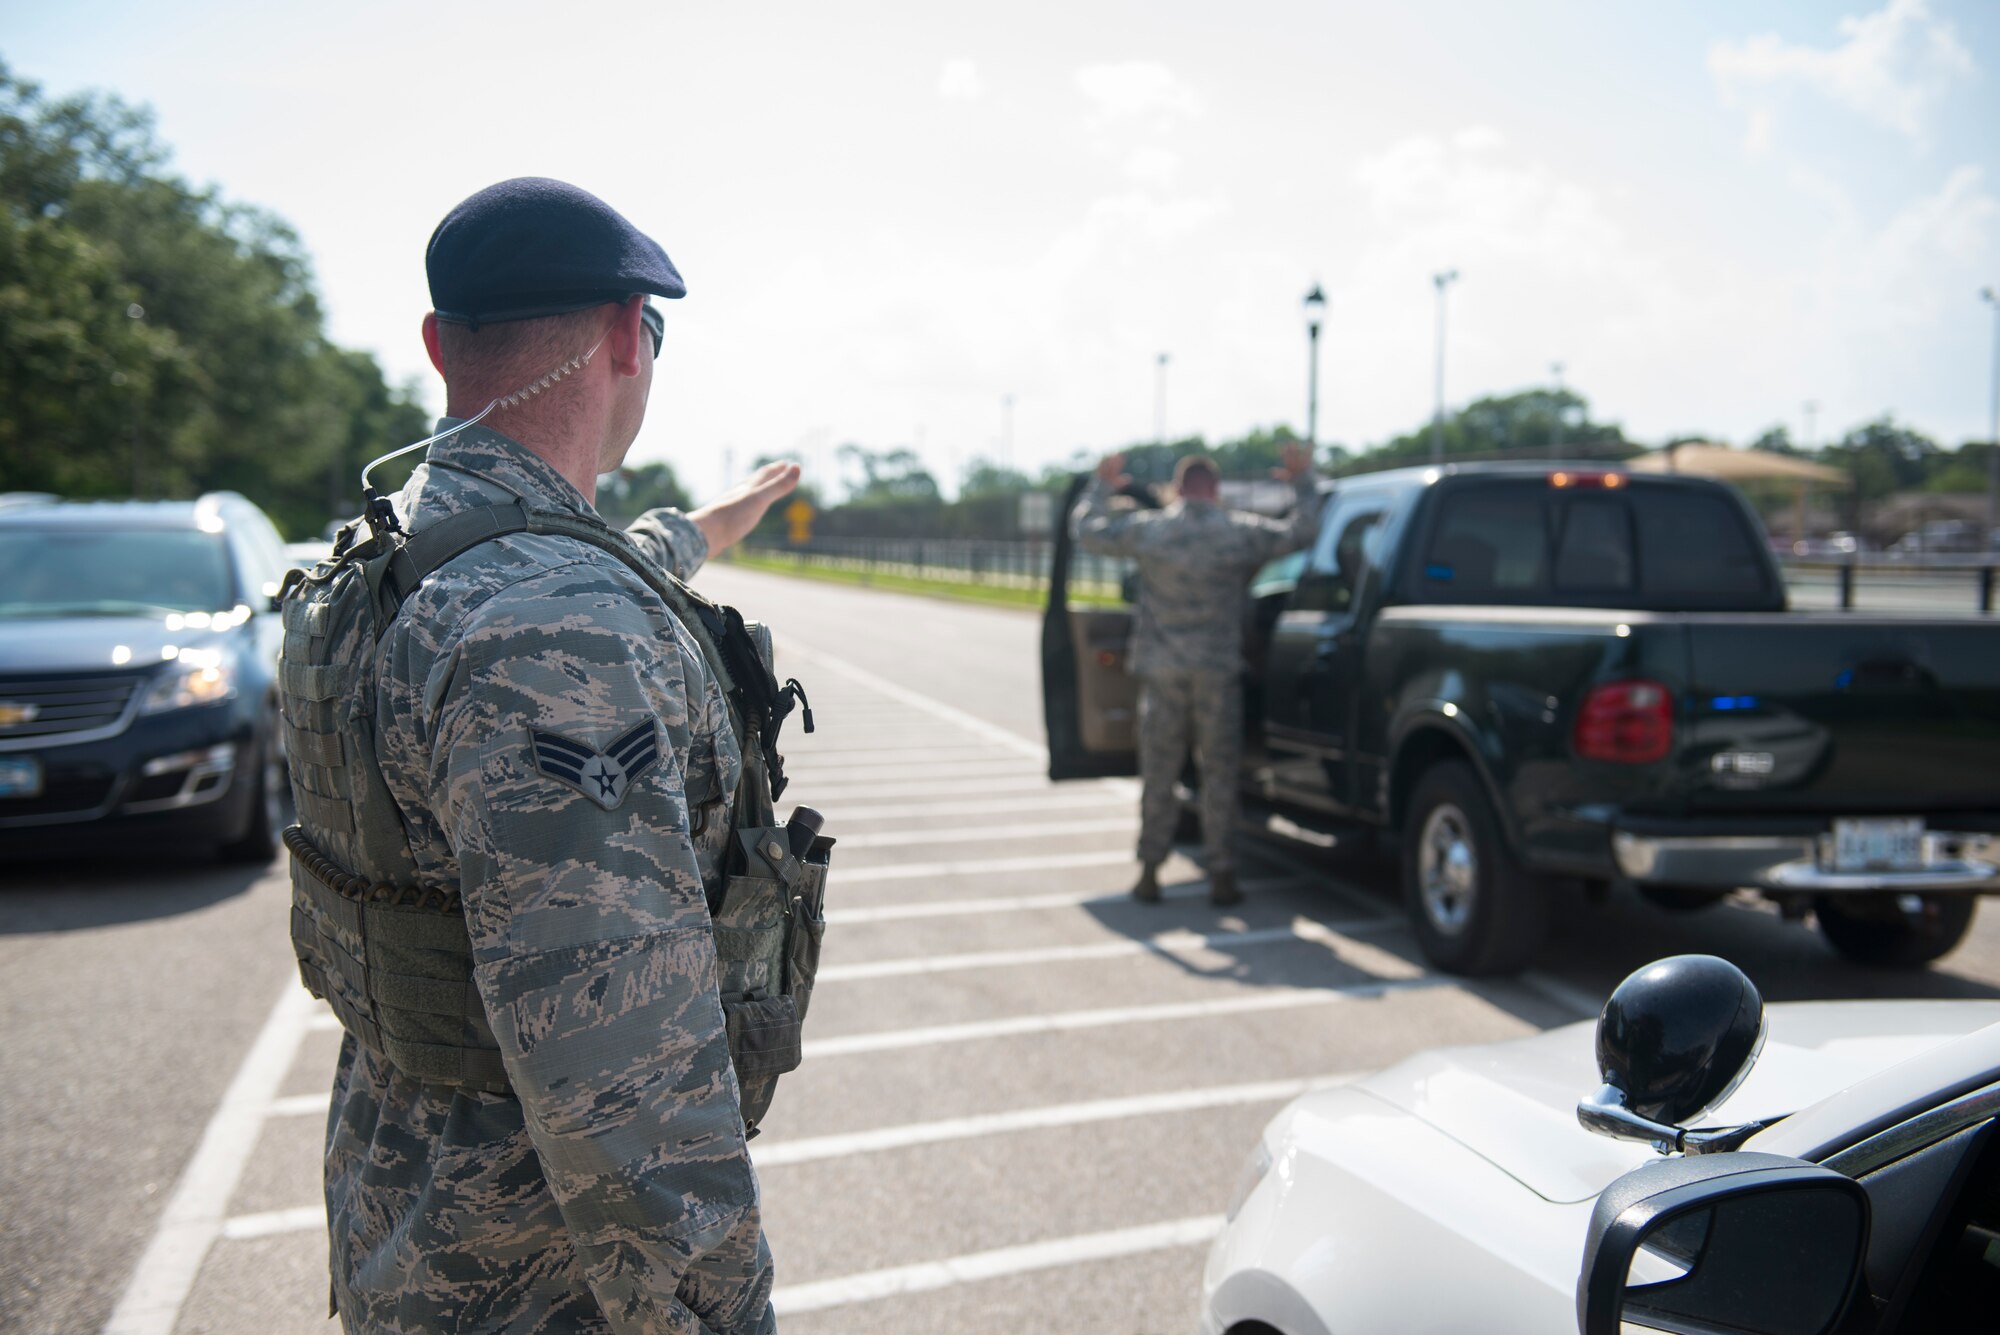 Senior Airman Zachary Vega, 81st Security Forces Squadron instillation patrolman, takes control of a role player during an exercise situation at a gate during a ride-along at Keesler Air Force Base, Miss., May 17, 2018. The ride-along program is part of the 81st SFS community involvement initiative where anyone, age 15 and up and with base access, can see what it's like to be a defender. If you are interested in the ride-along program, please contact Tech. Sgt. Matthew Oleson at 228-376-6601. (U.S. Air Force photo by Senior Airman Travis Beihl)